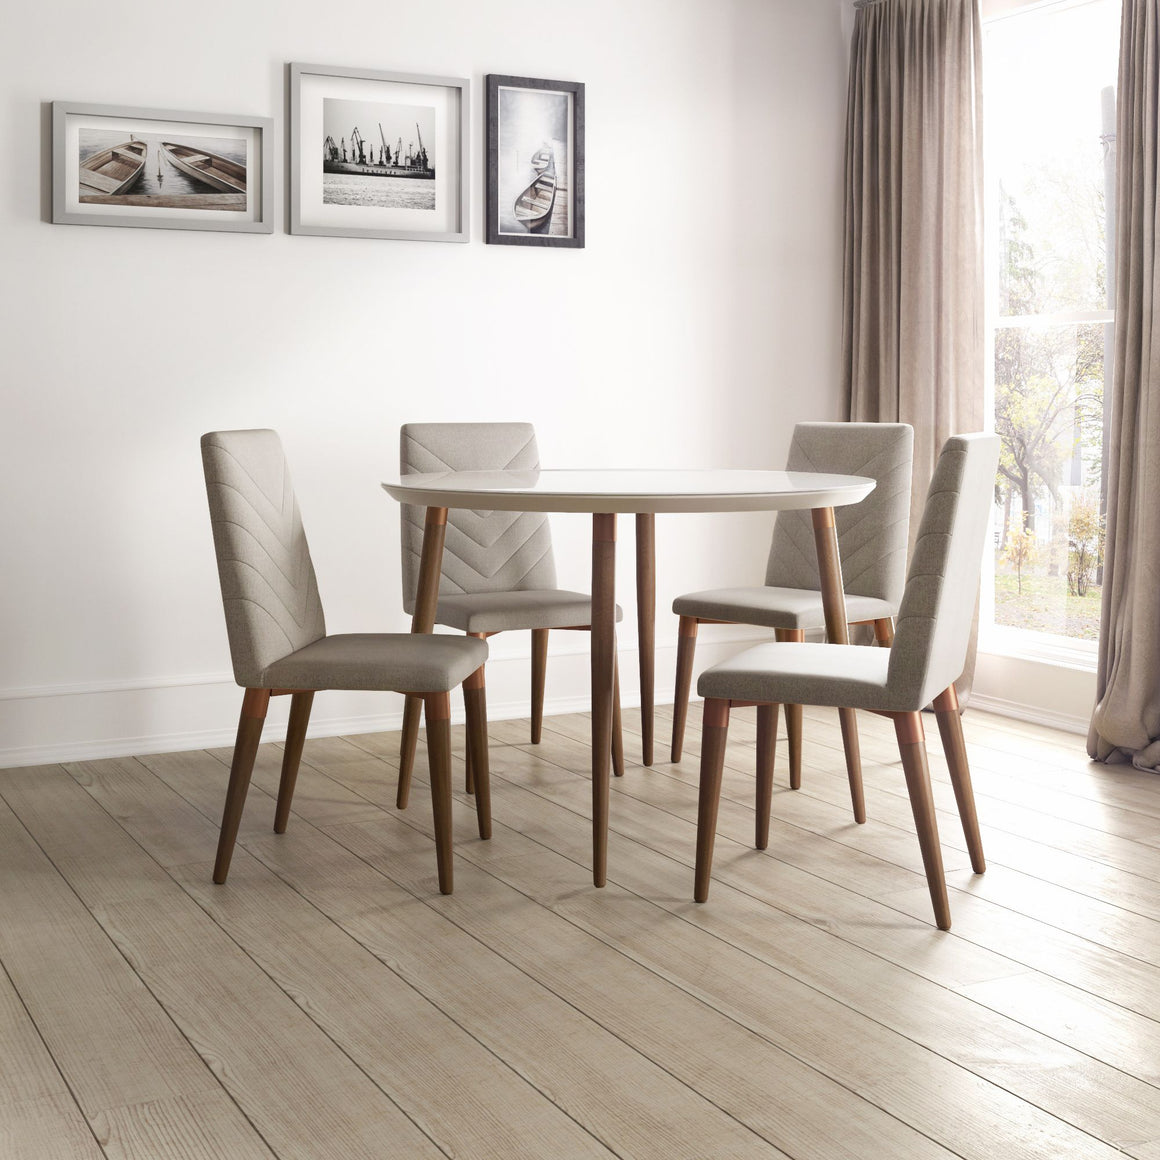 Utopia 45.28 Modern Round Dining Table with Chevron Dining Chairs in Off White and Grey - Set of 5